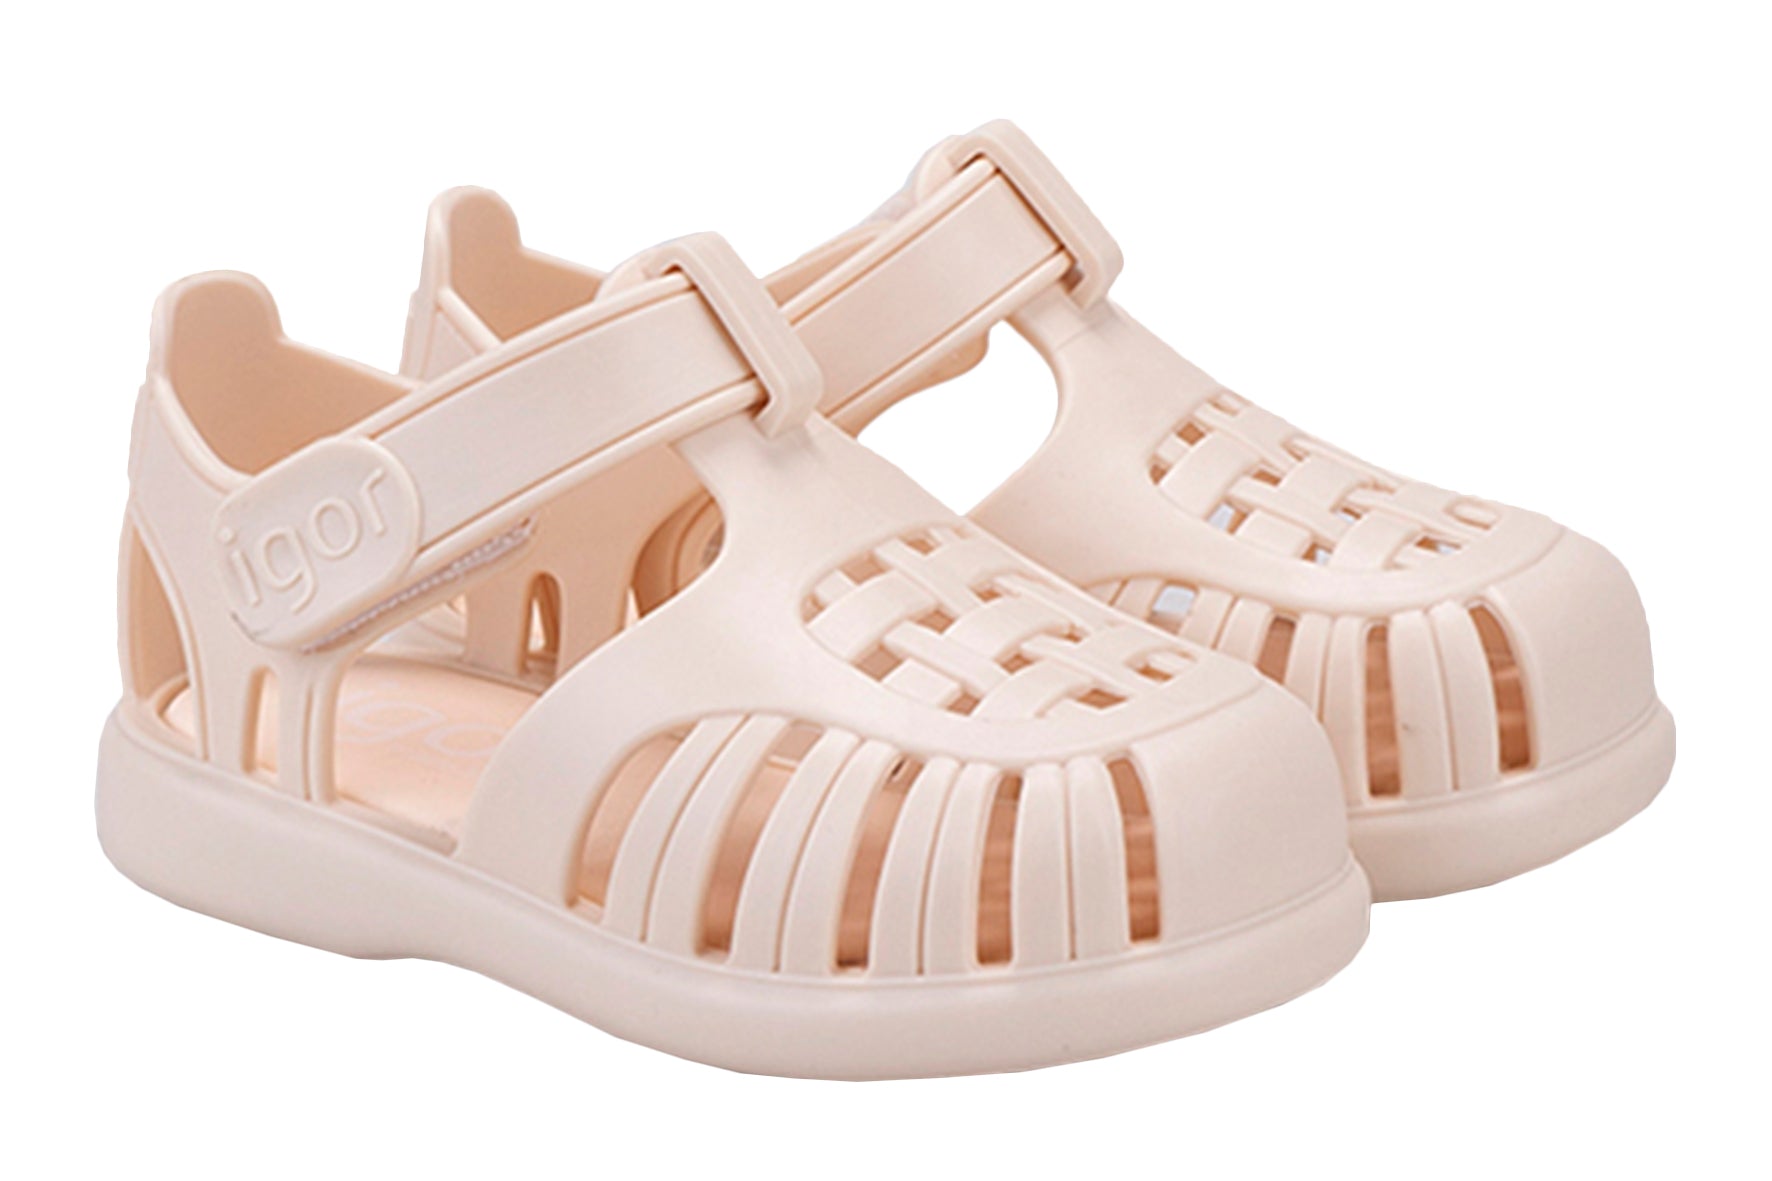 IGOR TOBBY SOLID JELLY SANDALS